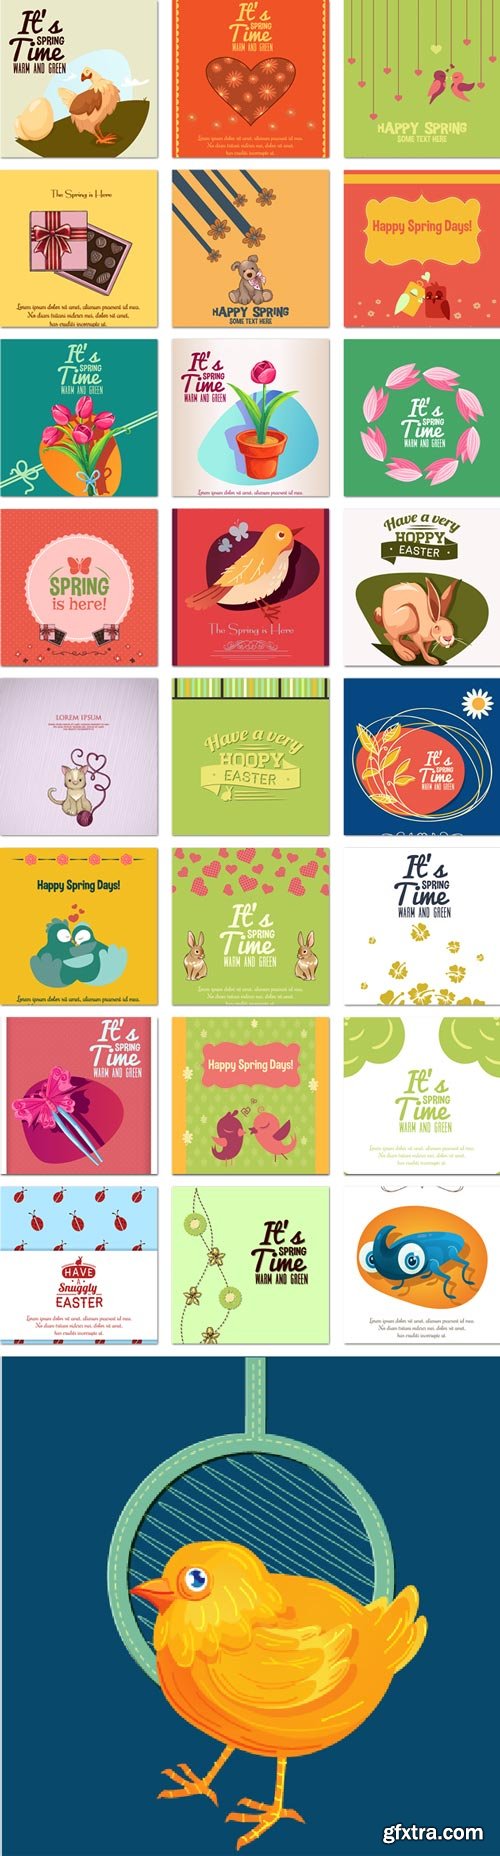 Get 300 Premium Vector Illustrations from 12 Different Categories at 98% OFF